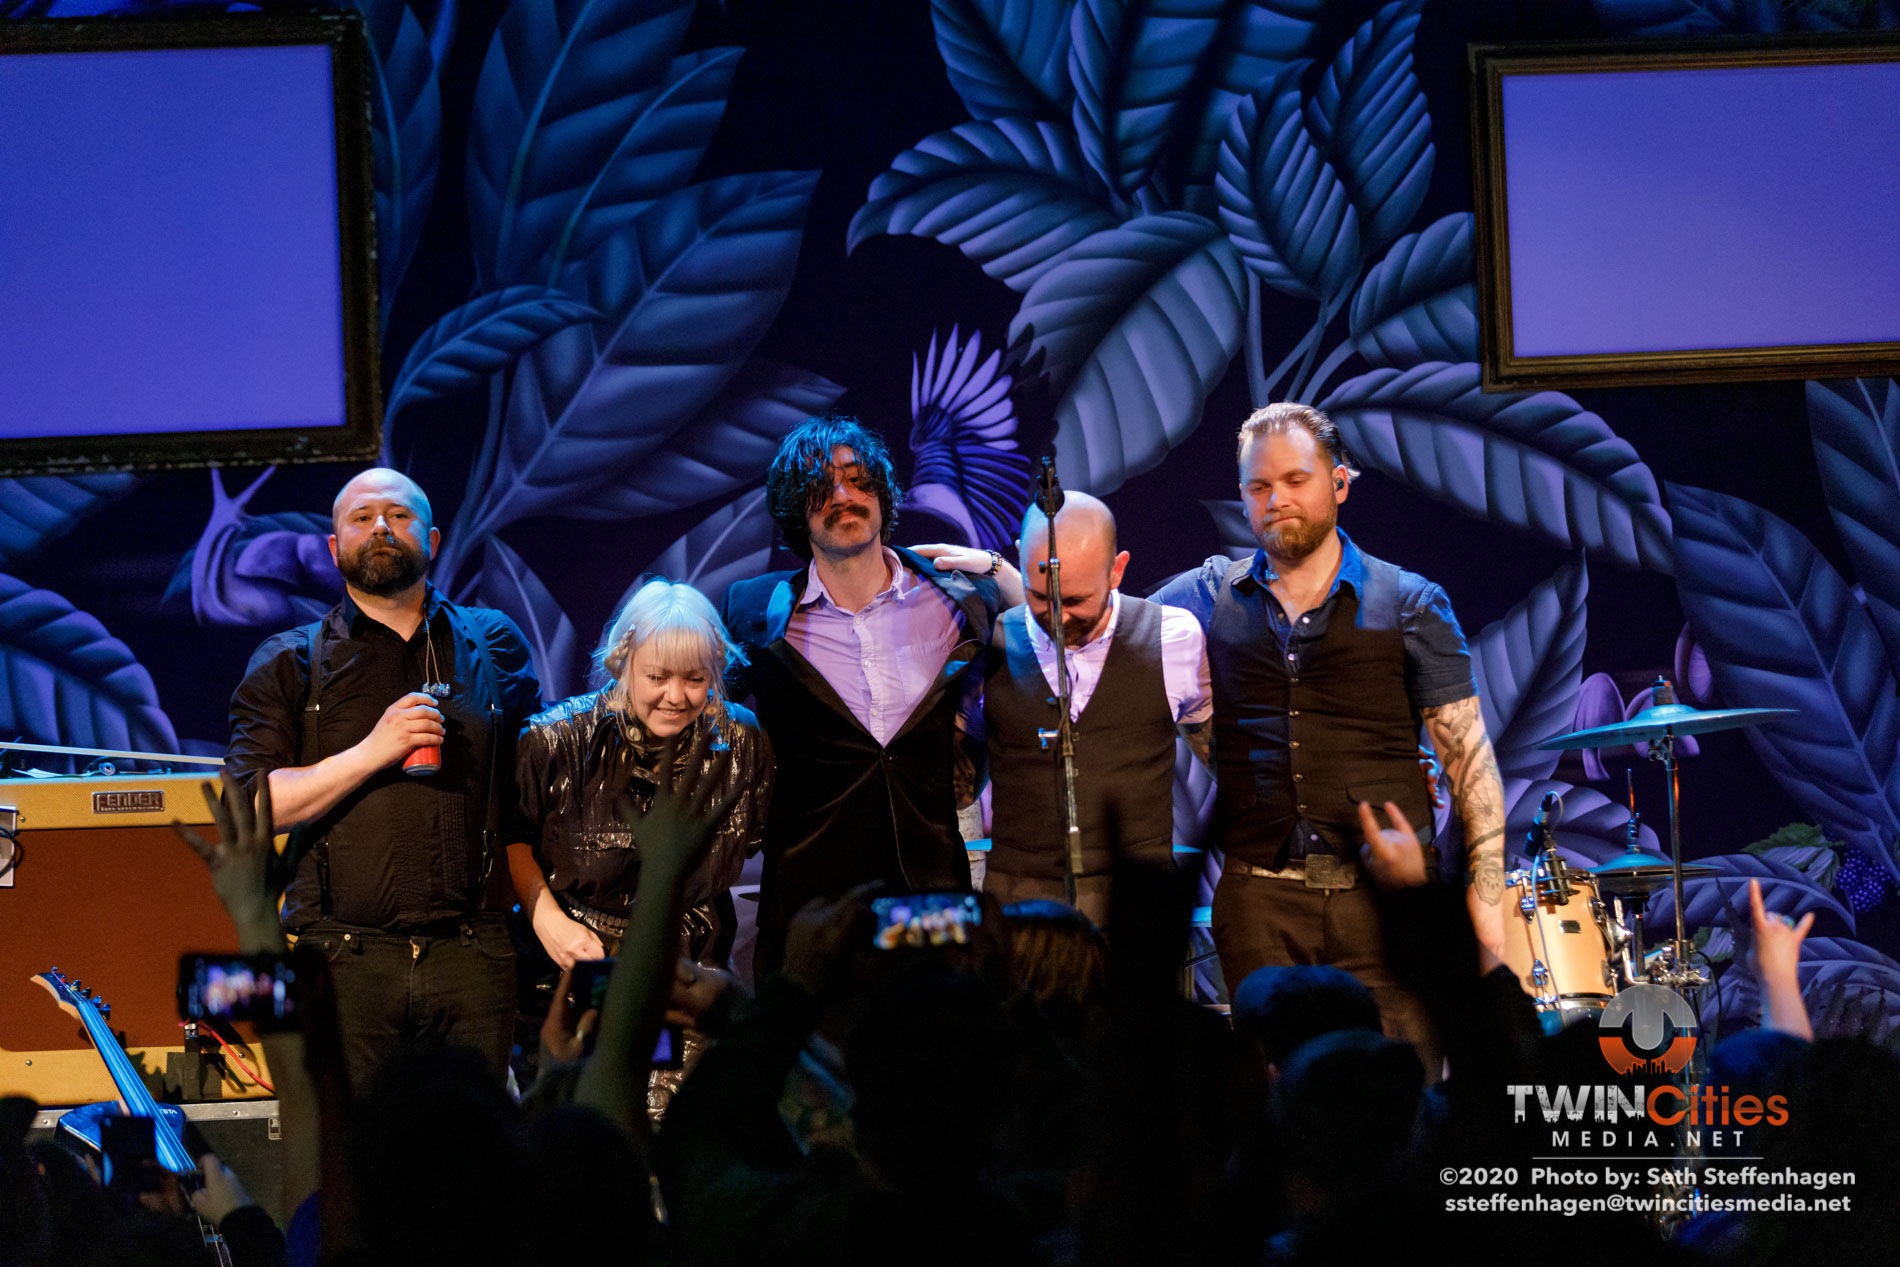 March 12, 2020 - Minneapolis, Minnesota, United States - Murder By Death live in concert at The Cedar Cultural Center along with Amigo The Devil as the opener.

(Photo by Seth Steffenhagen/Steffenhagen Photography)